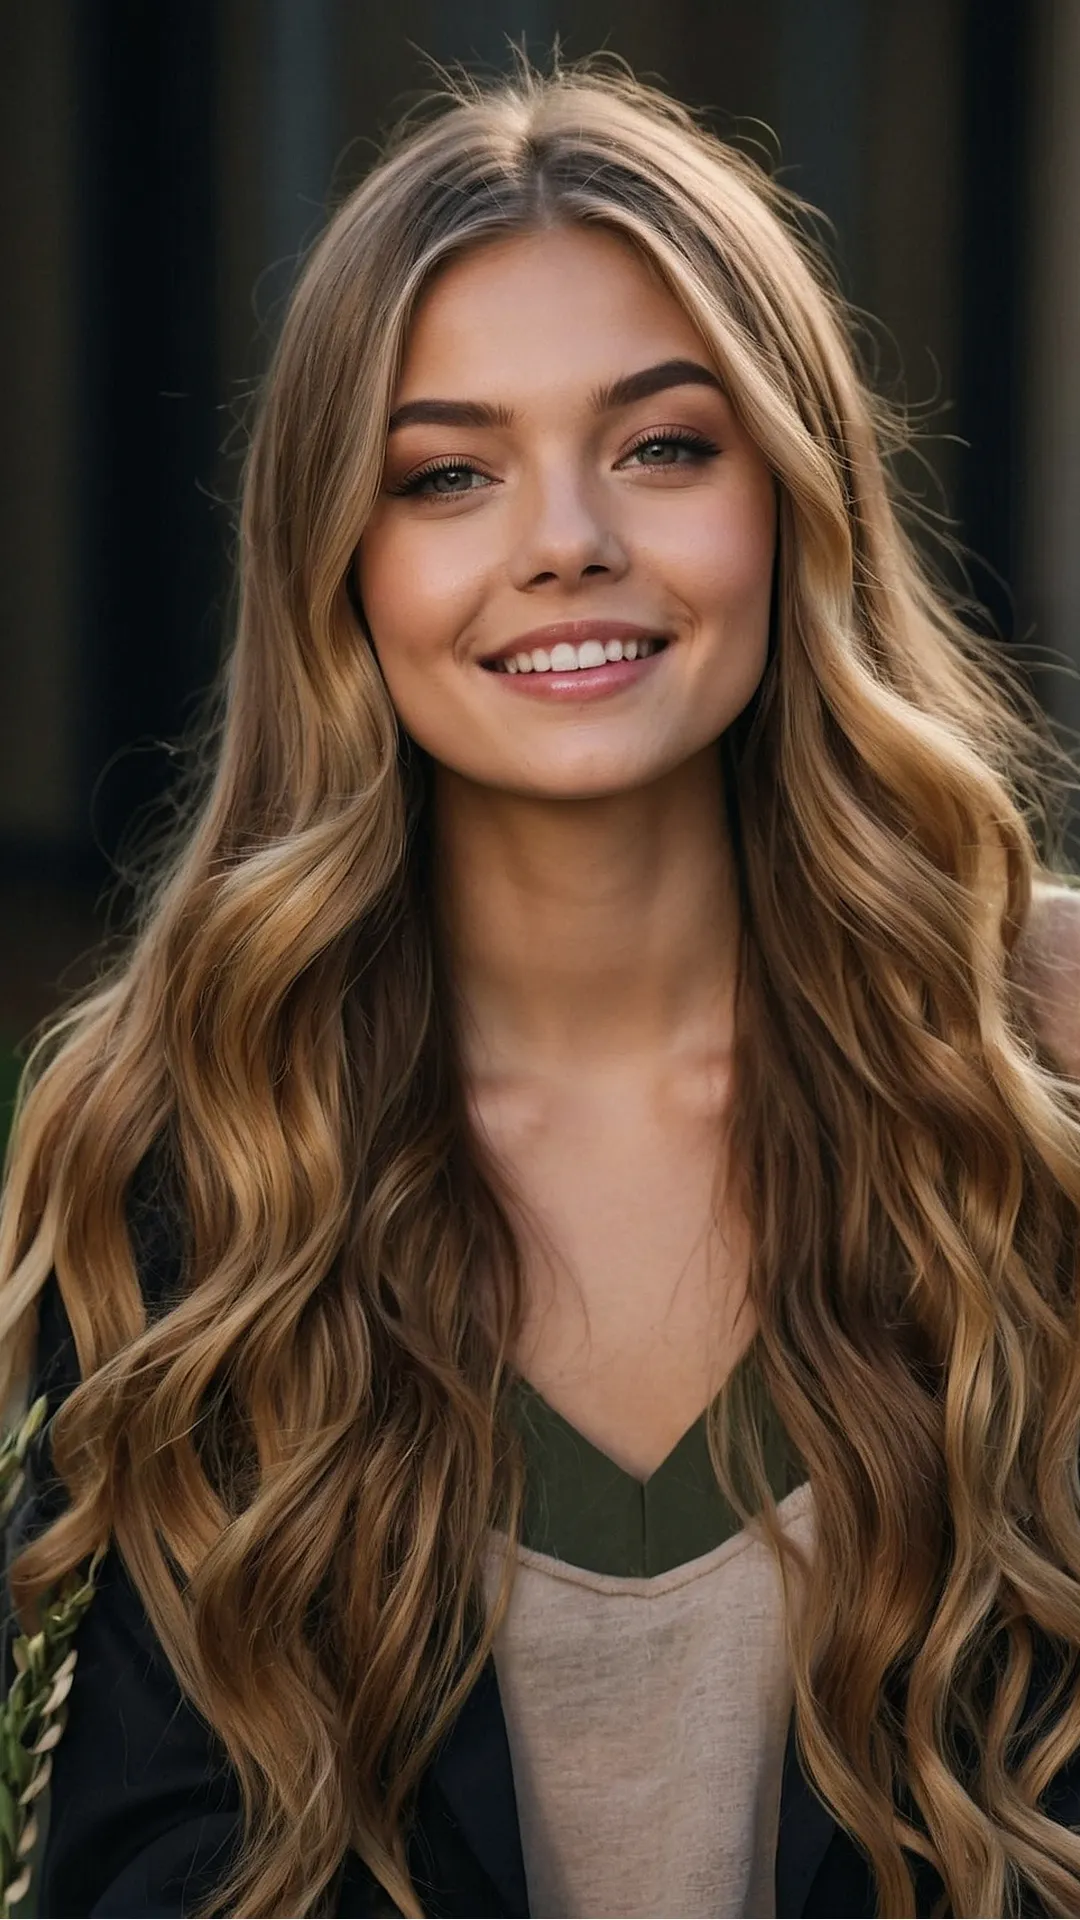 Caps Off to Style: Graduation Hair Looks